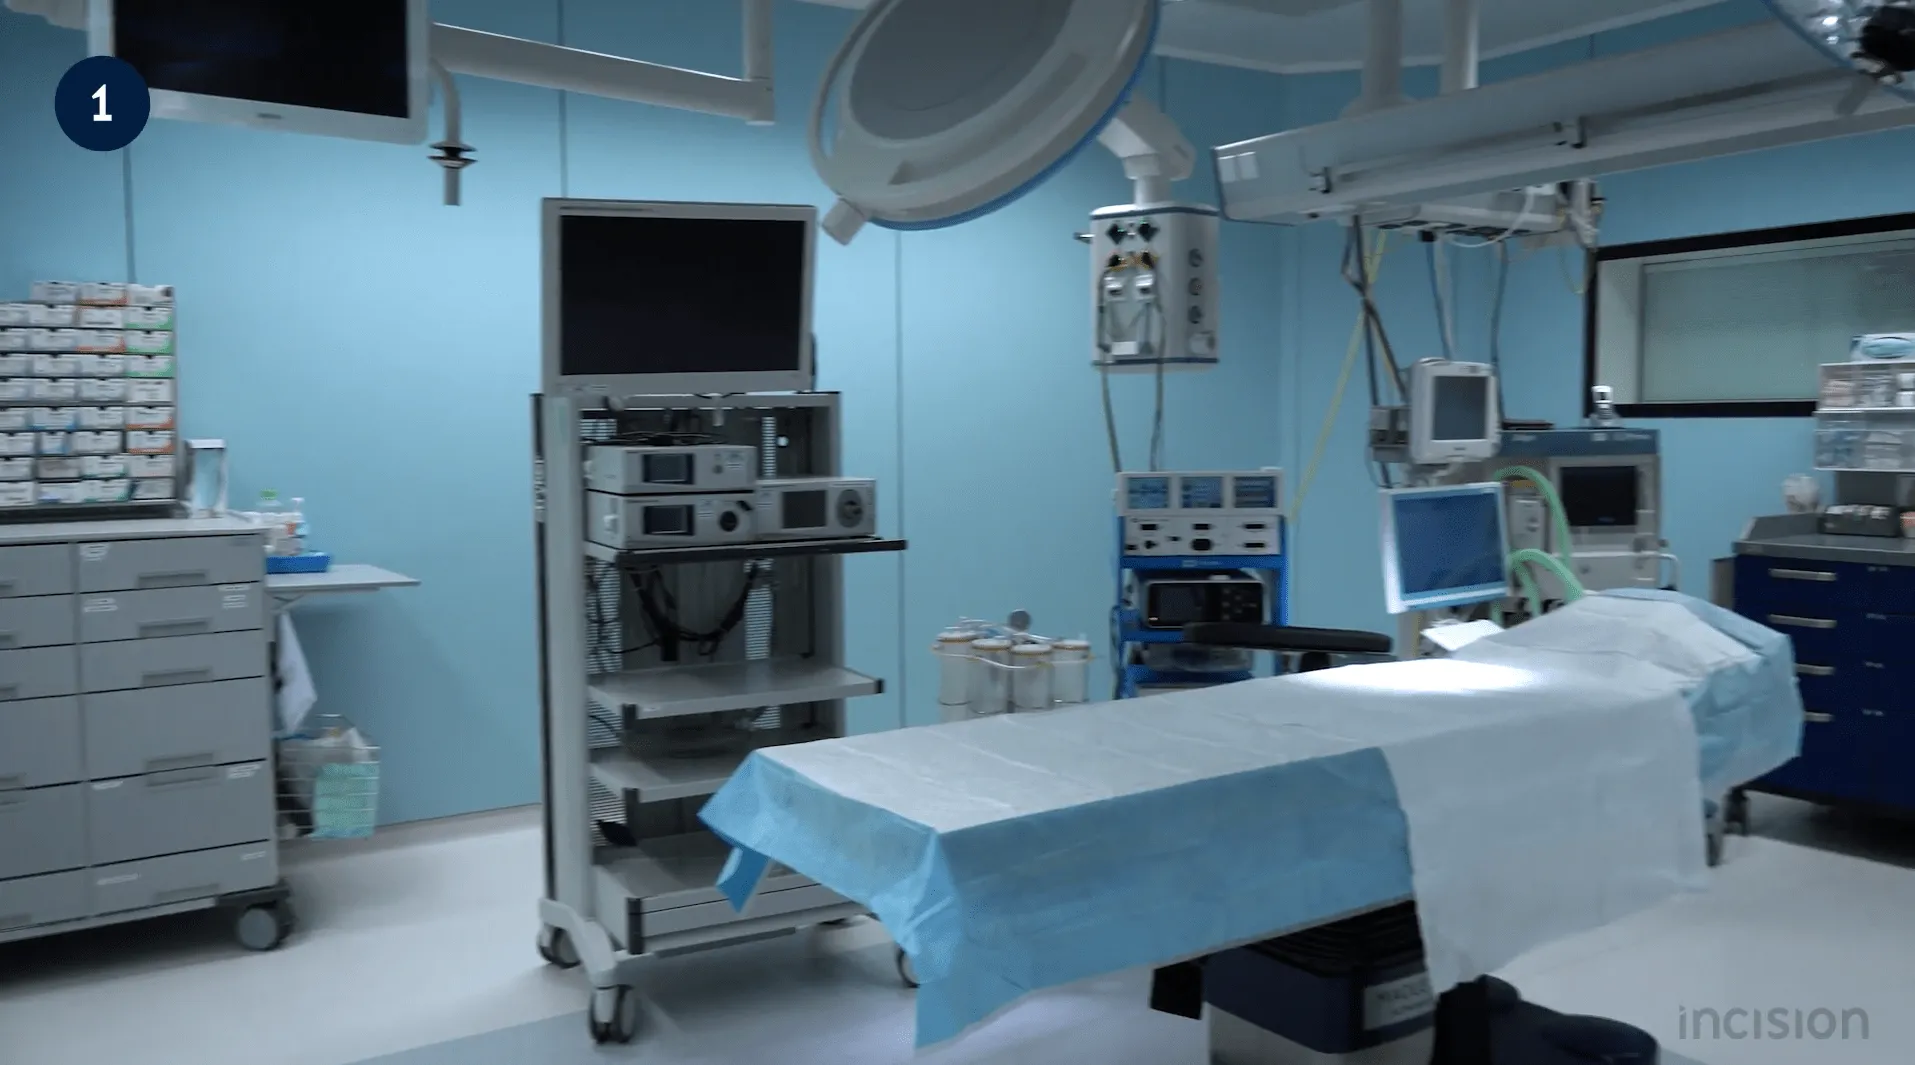 The inside of an operating room